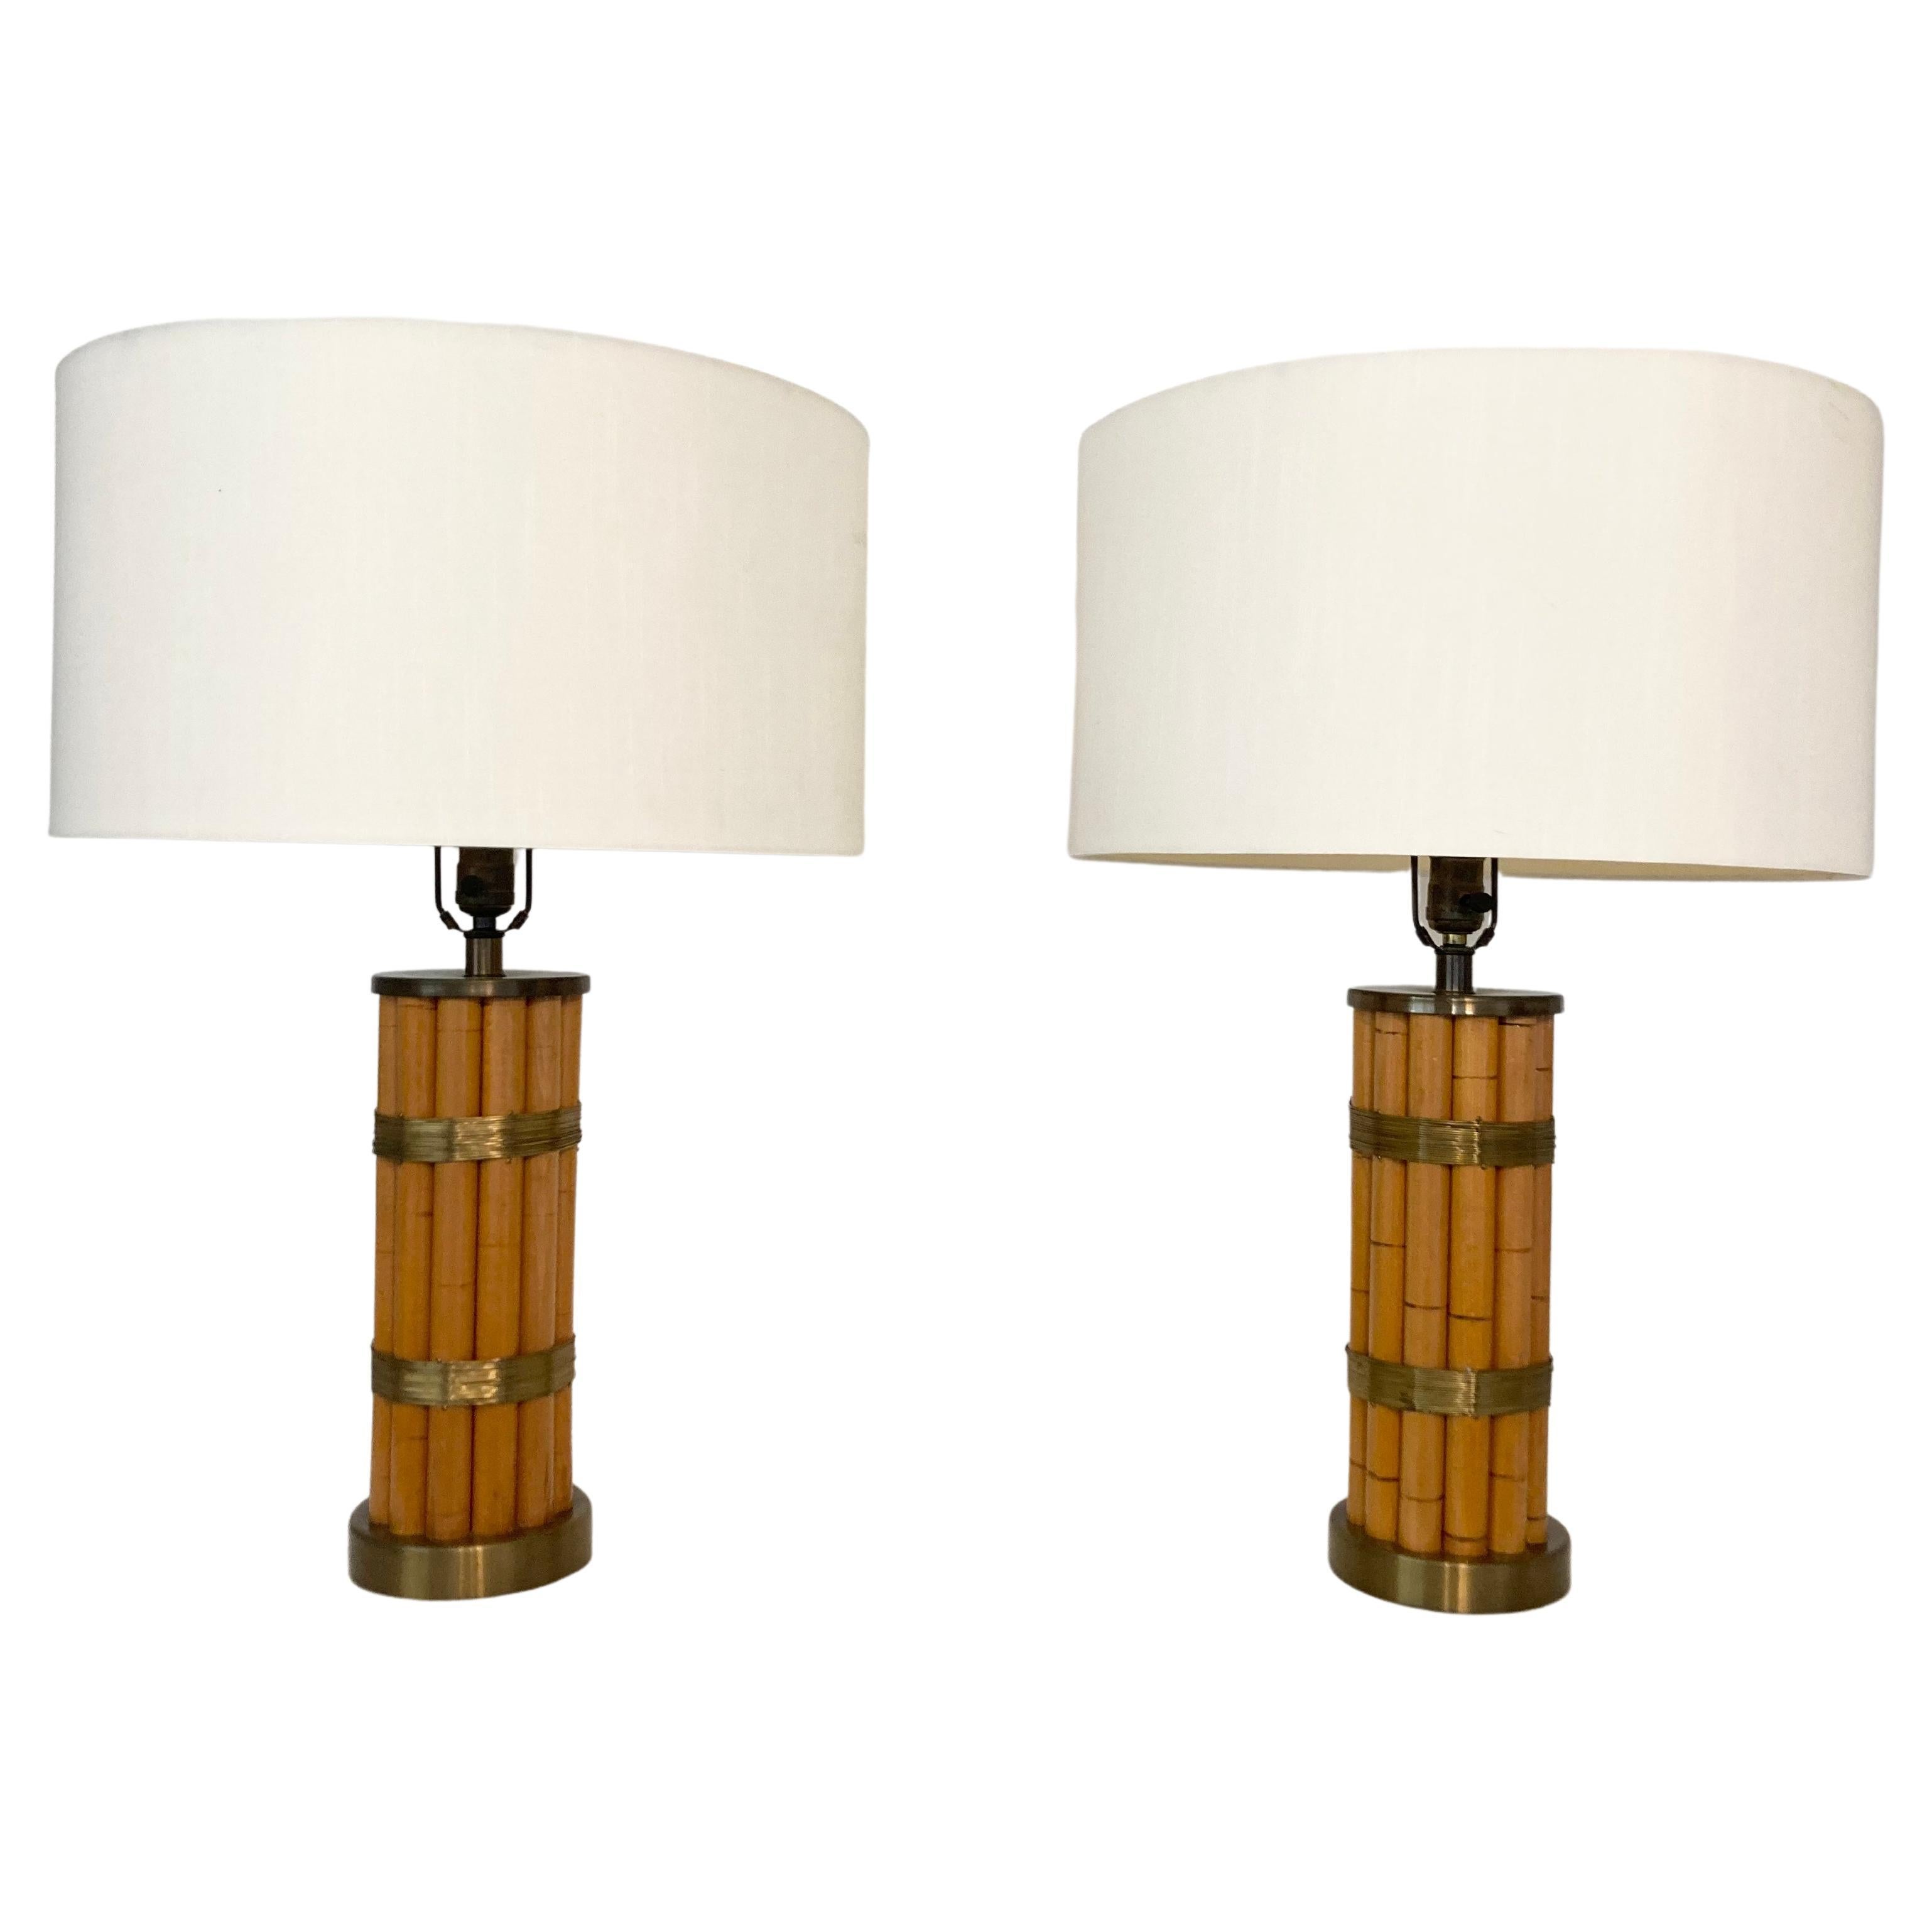 Pair Russel Wright Faux Bamboo Brass Wrap Table Lamps, Mid Century Modern For Sale